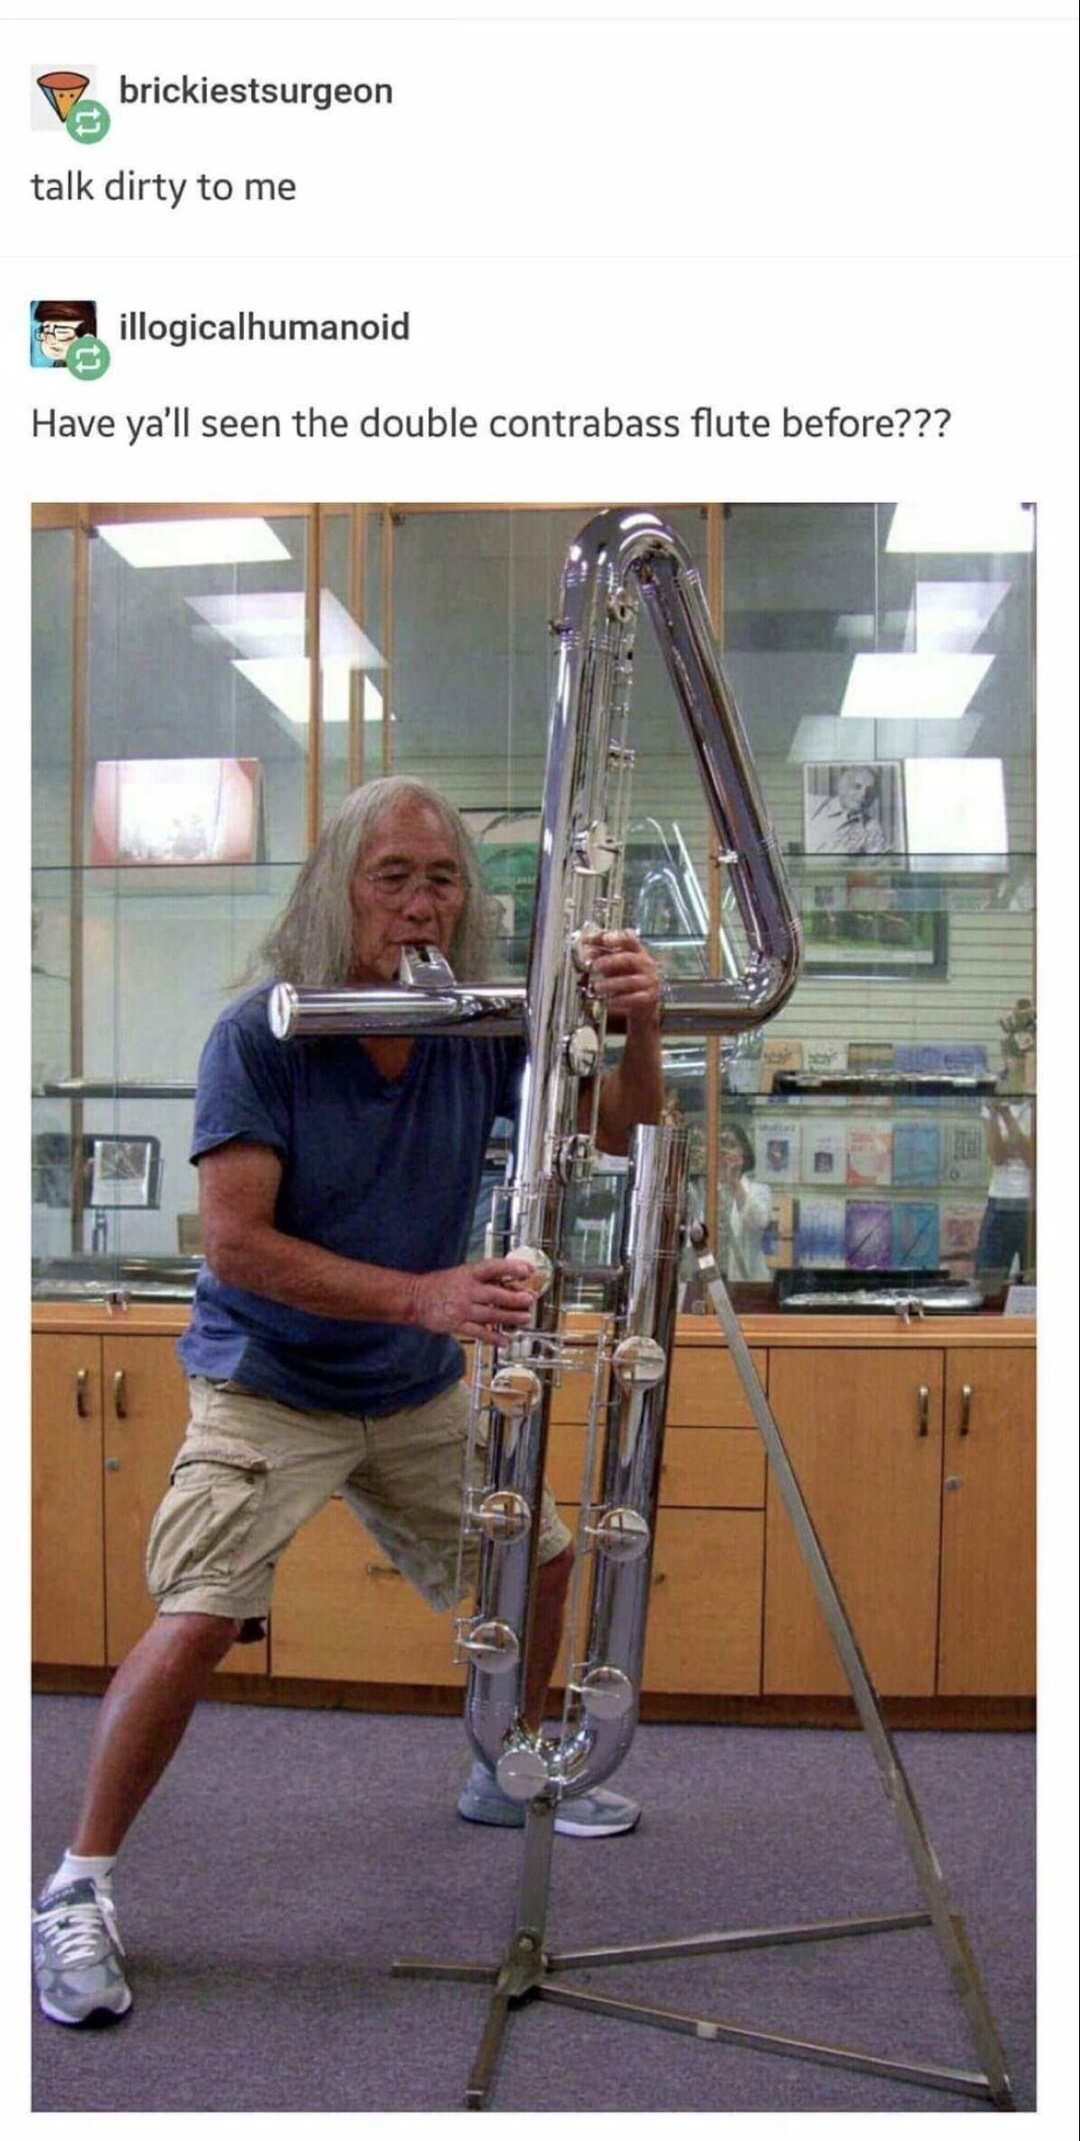 memes - double contrabass flute - brickiestsurgeon talk dirty to me illogicalhumanoid Have ya'll seen the double contrabass flute before???